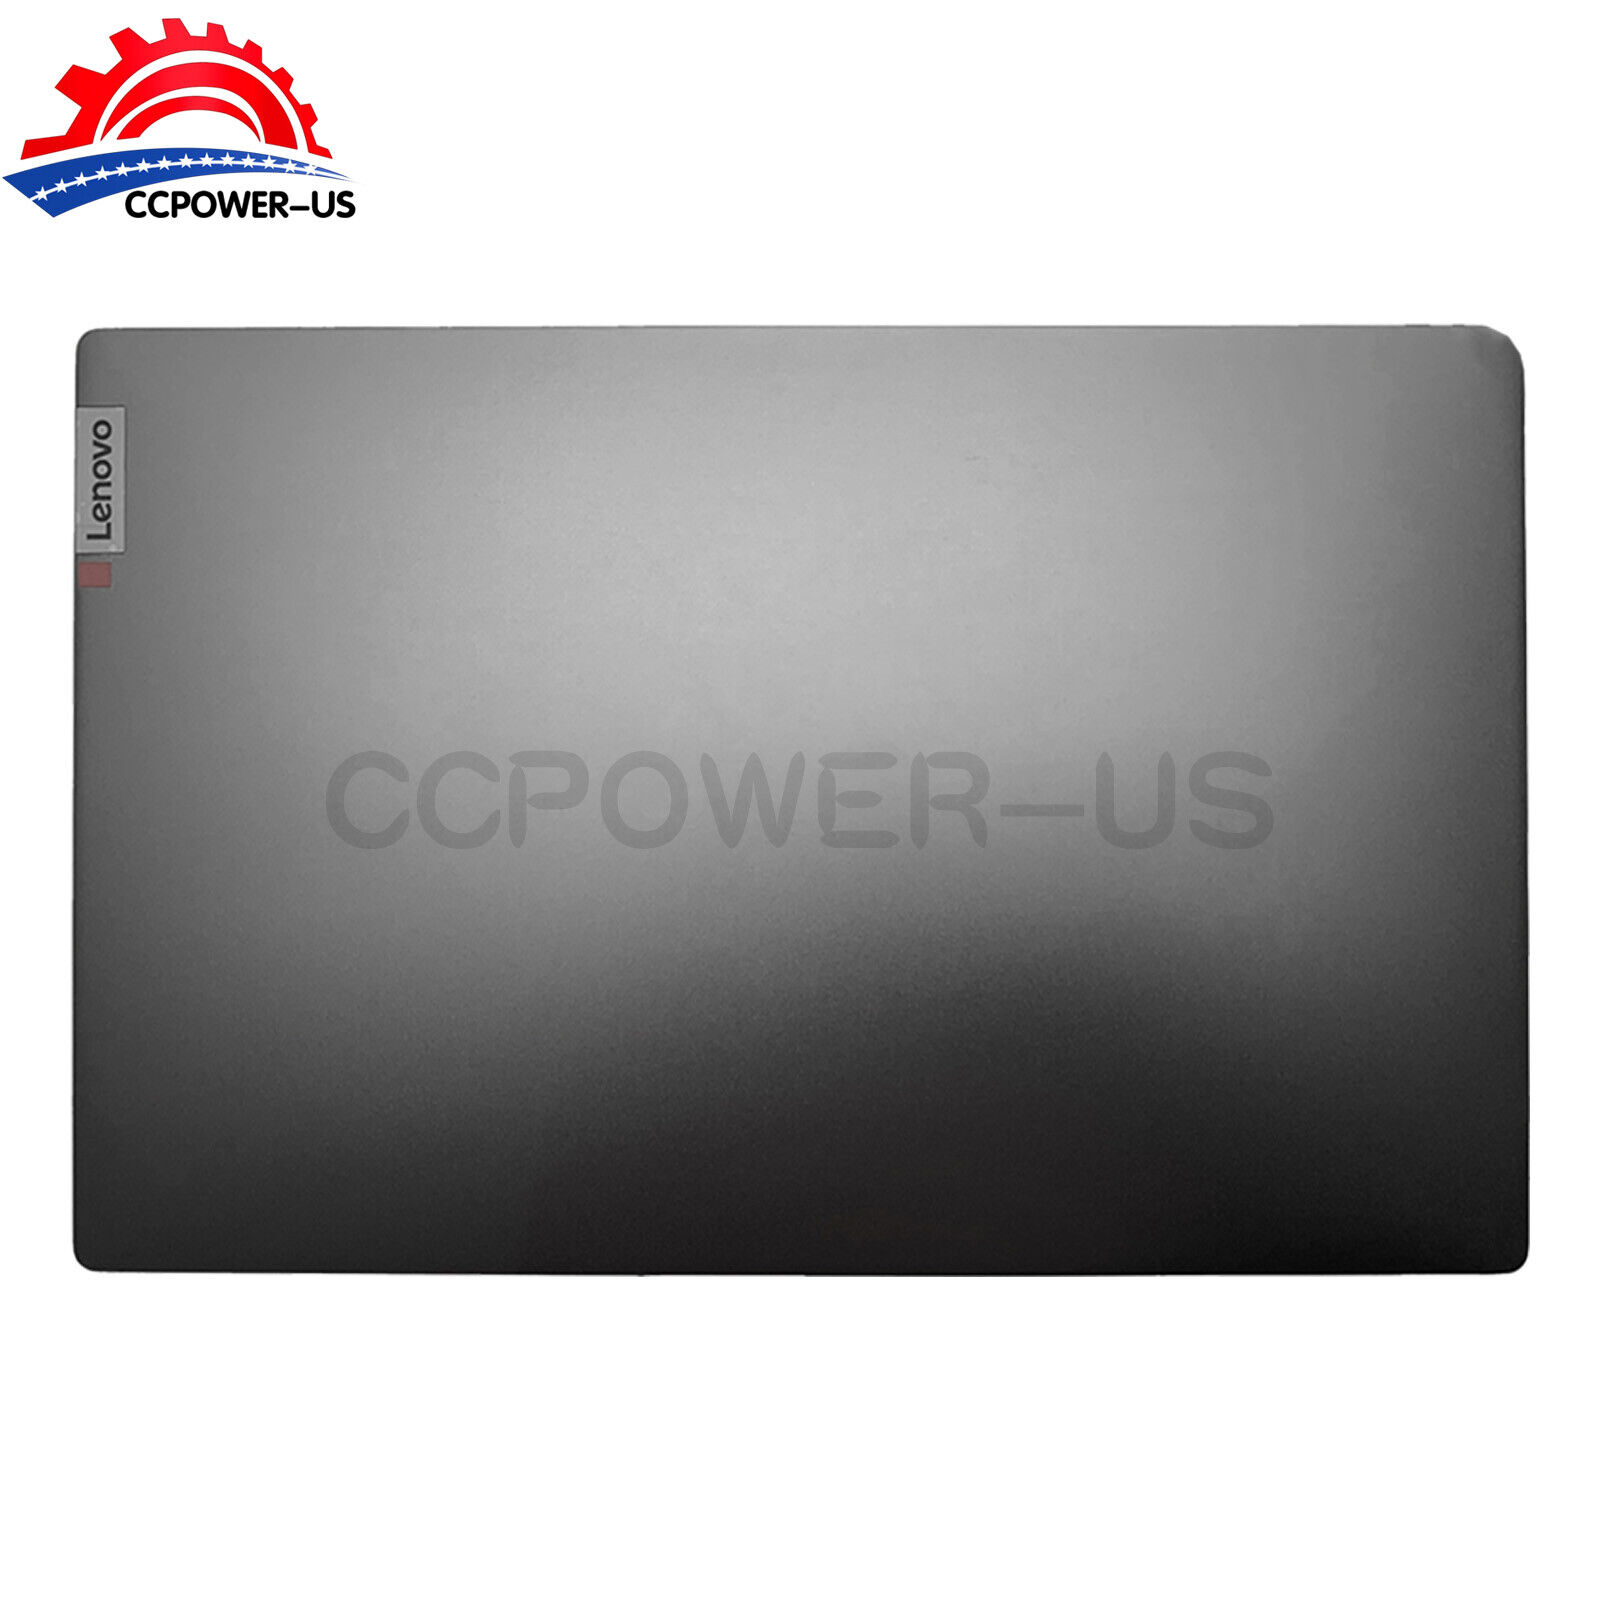 New Lenovo ideapad 5 15IIL05 15ARE05 15ITL05 LCD Back Cover/Bezel/Hinges USA